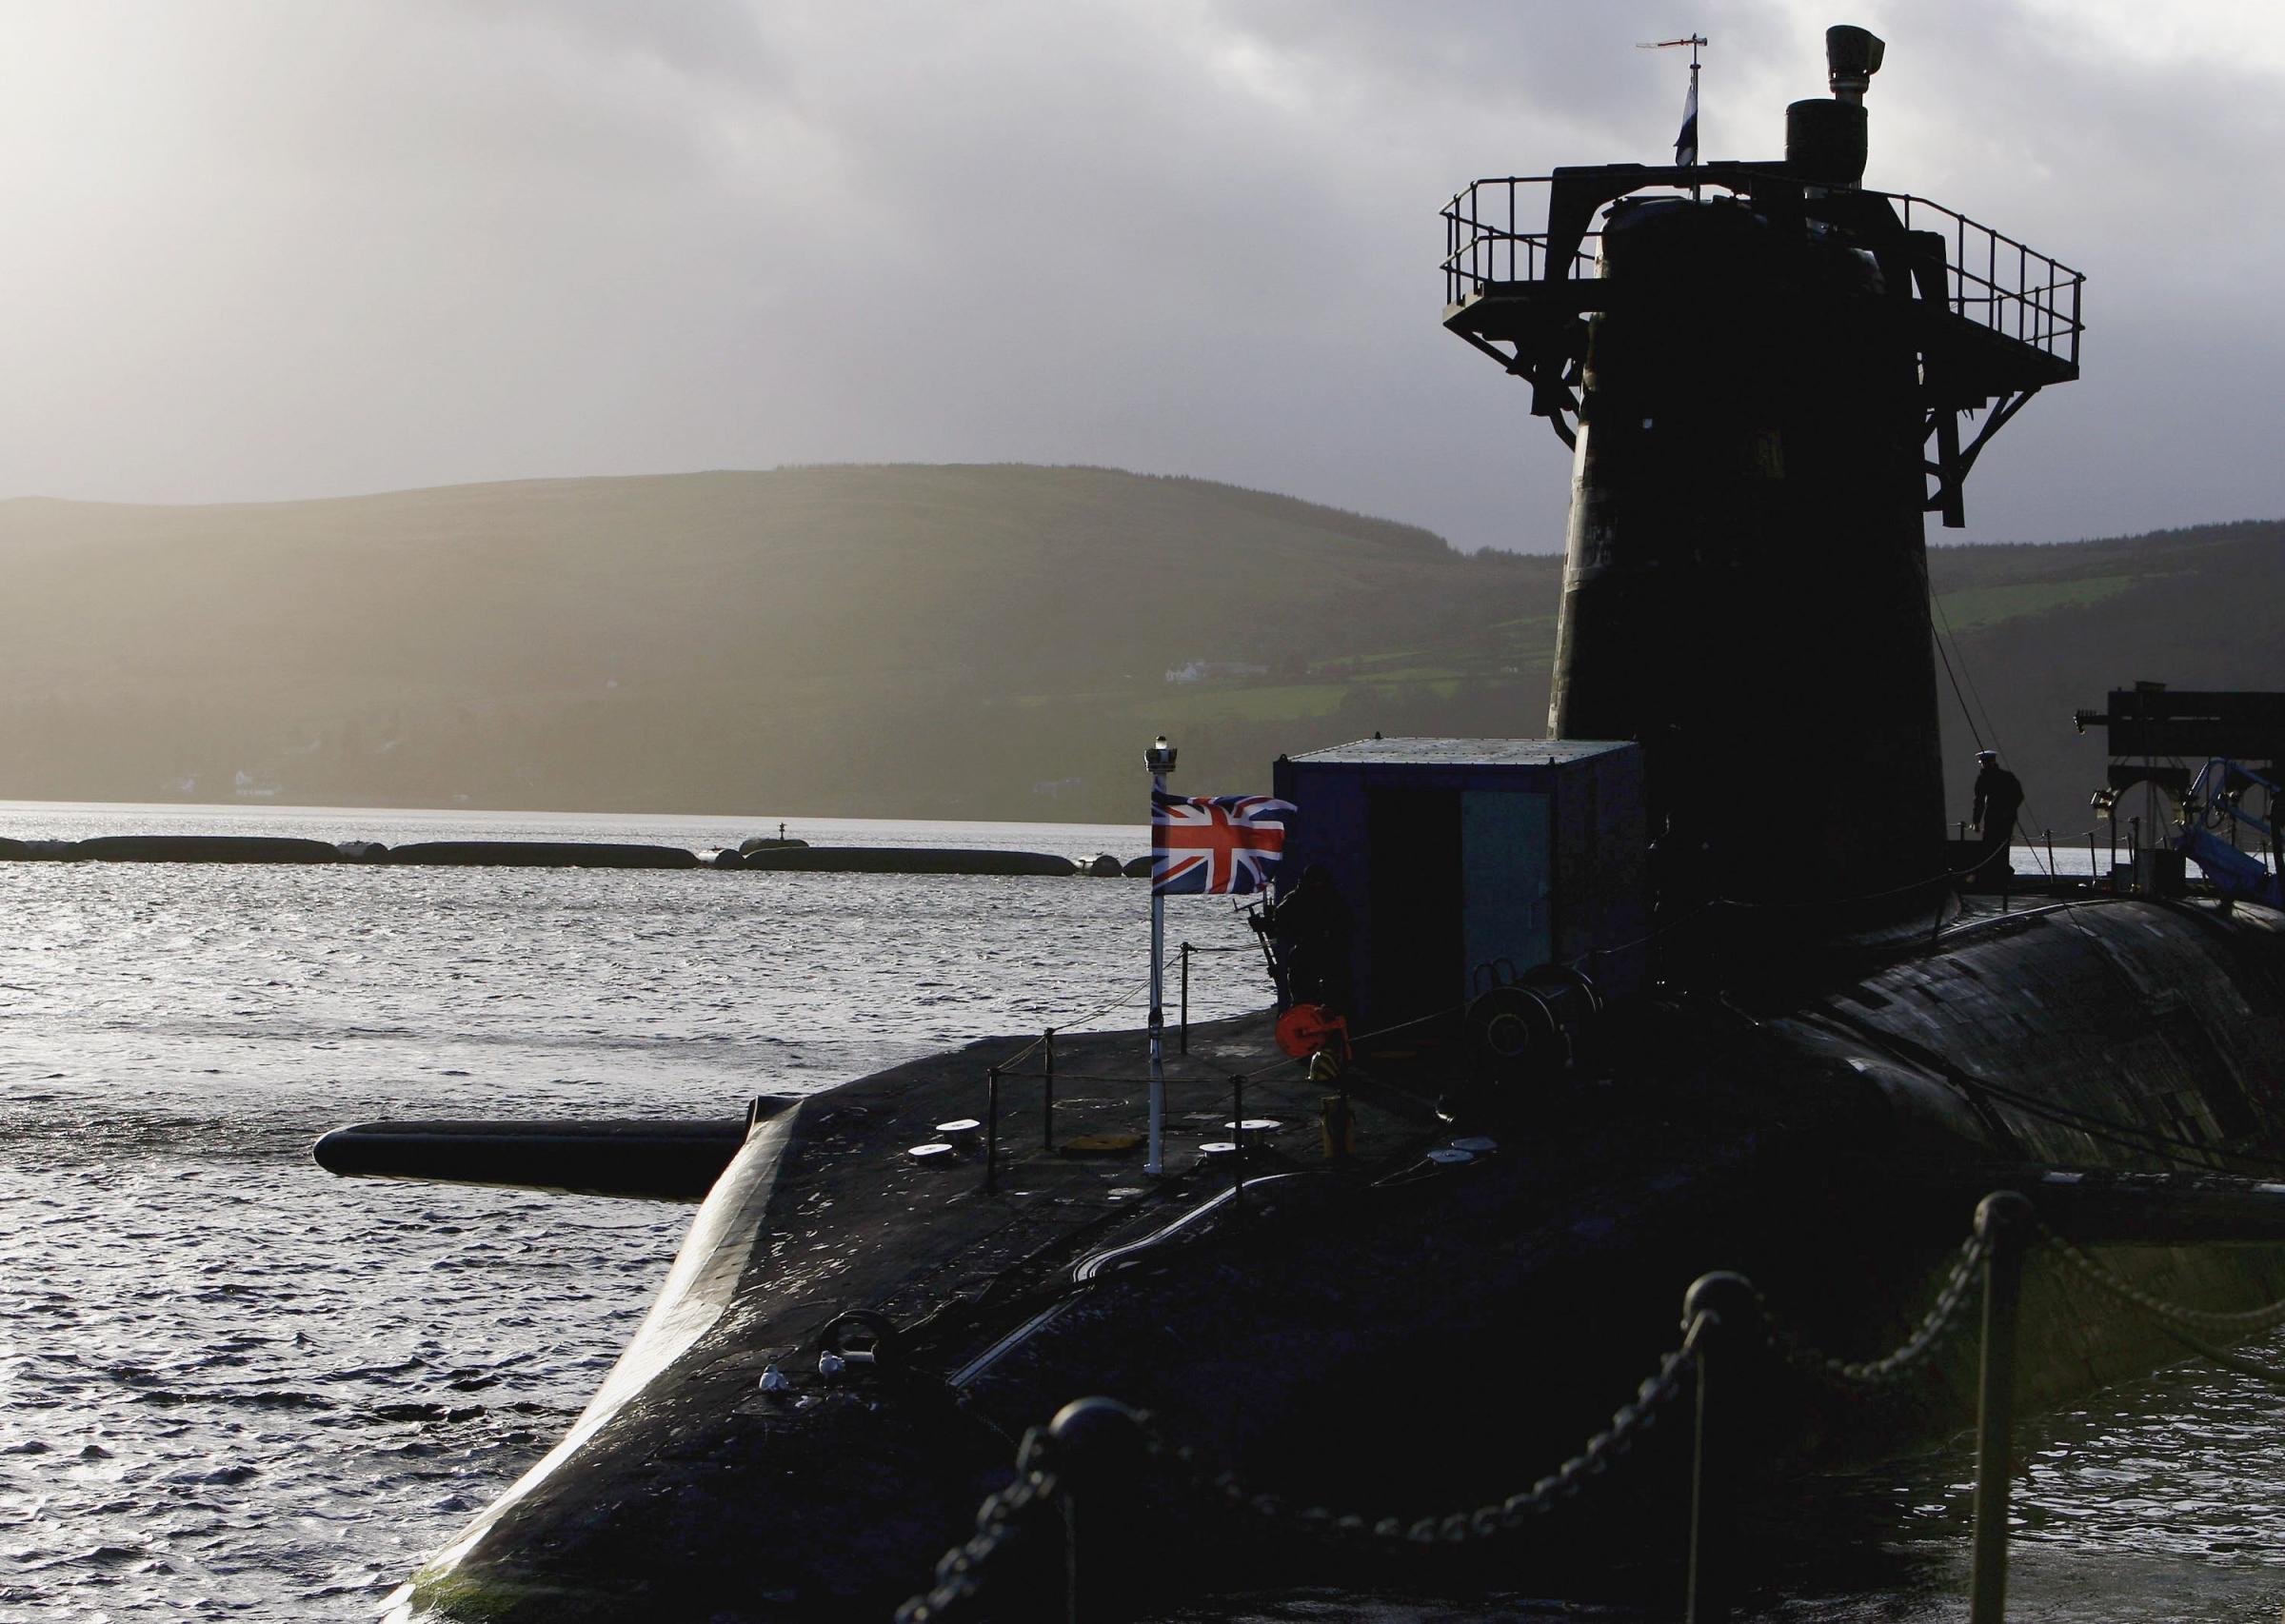 'Scotland's may be blocked from EU if it axes Trident rapidly'